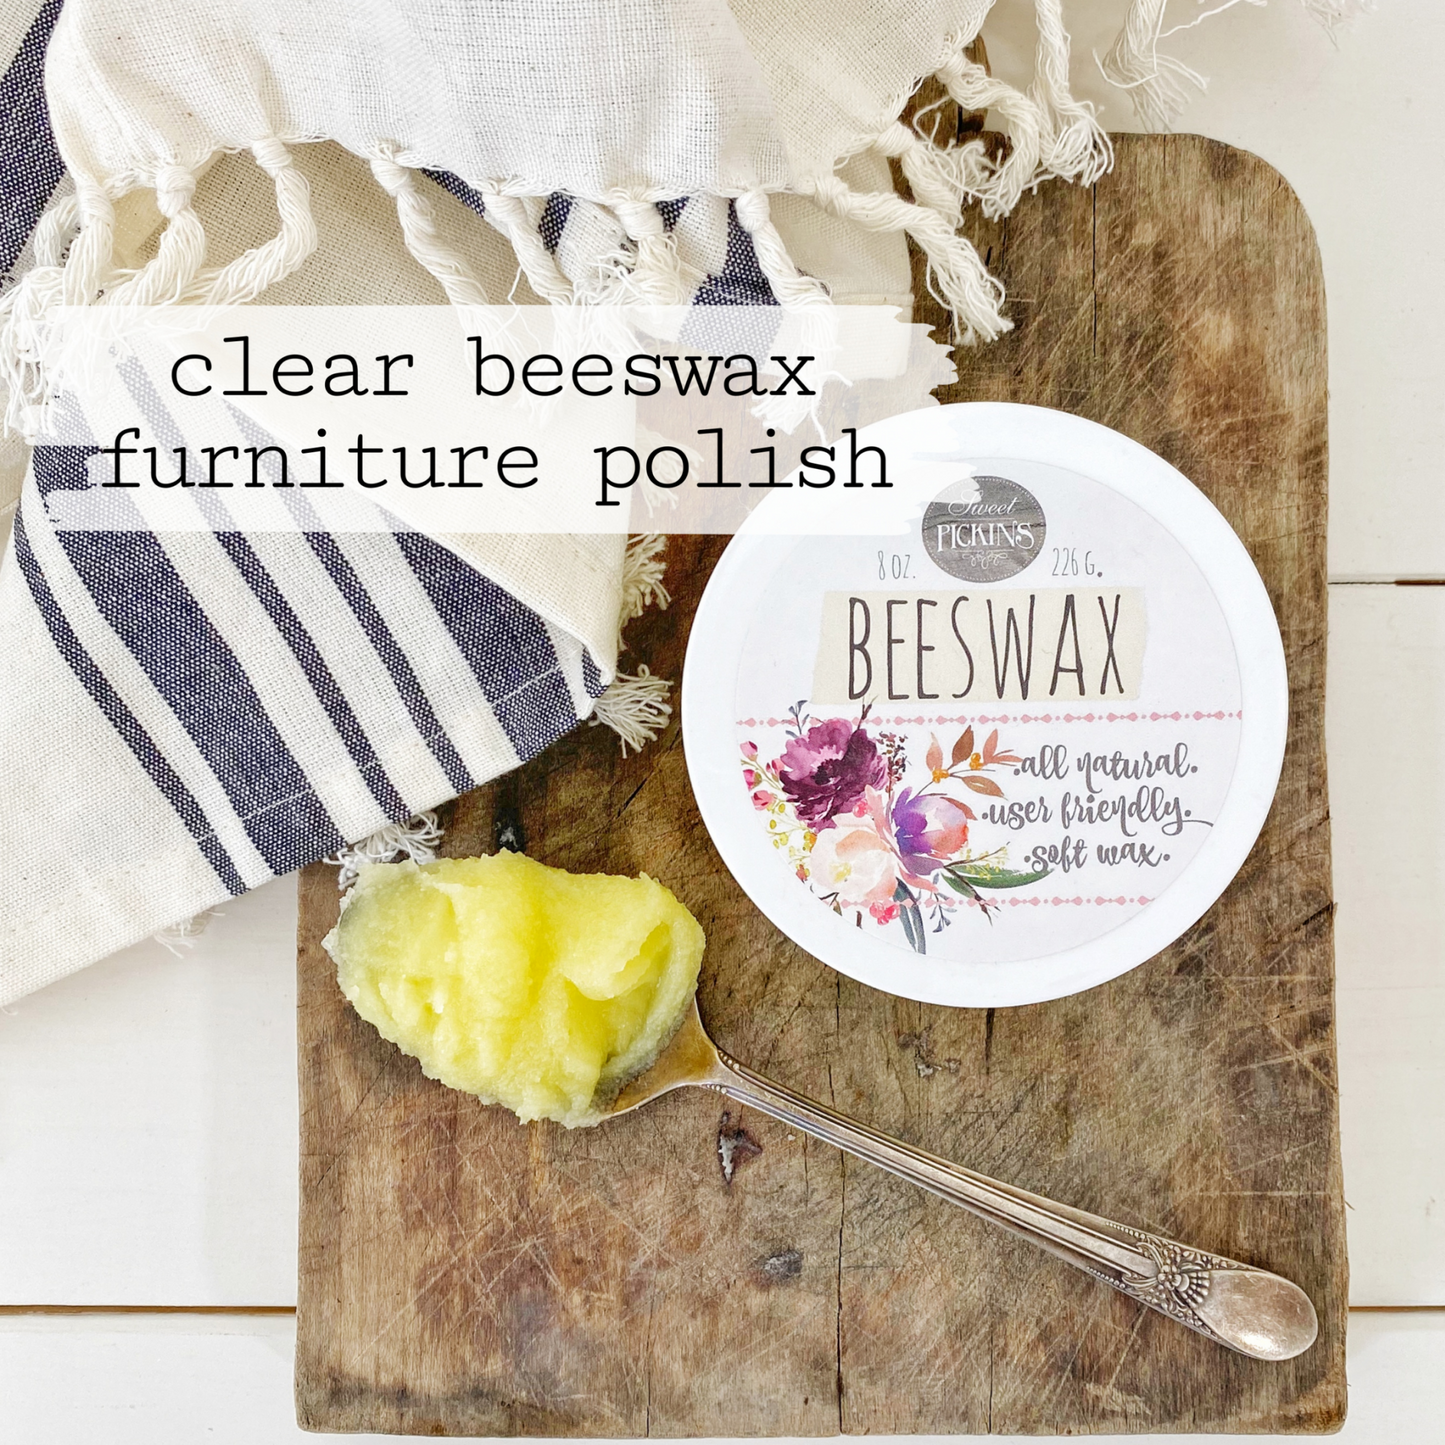 Product photo of Sweet PickinsClear Beeswax Furniture Polish available at Milton's Daughter